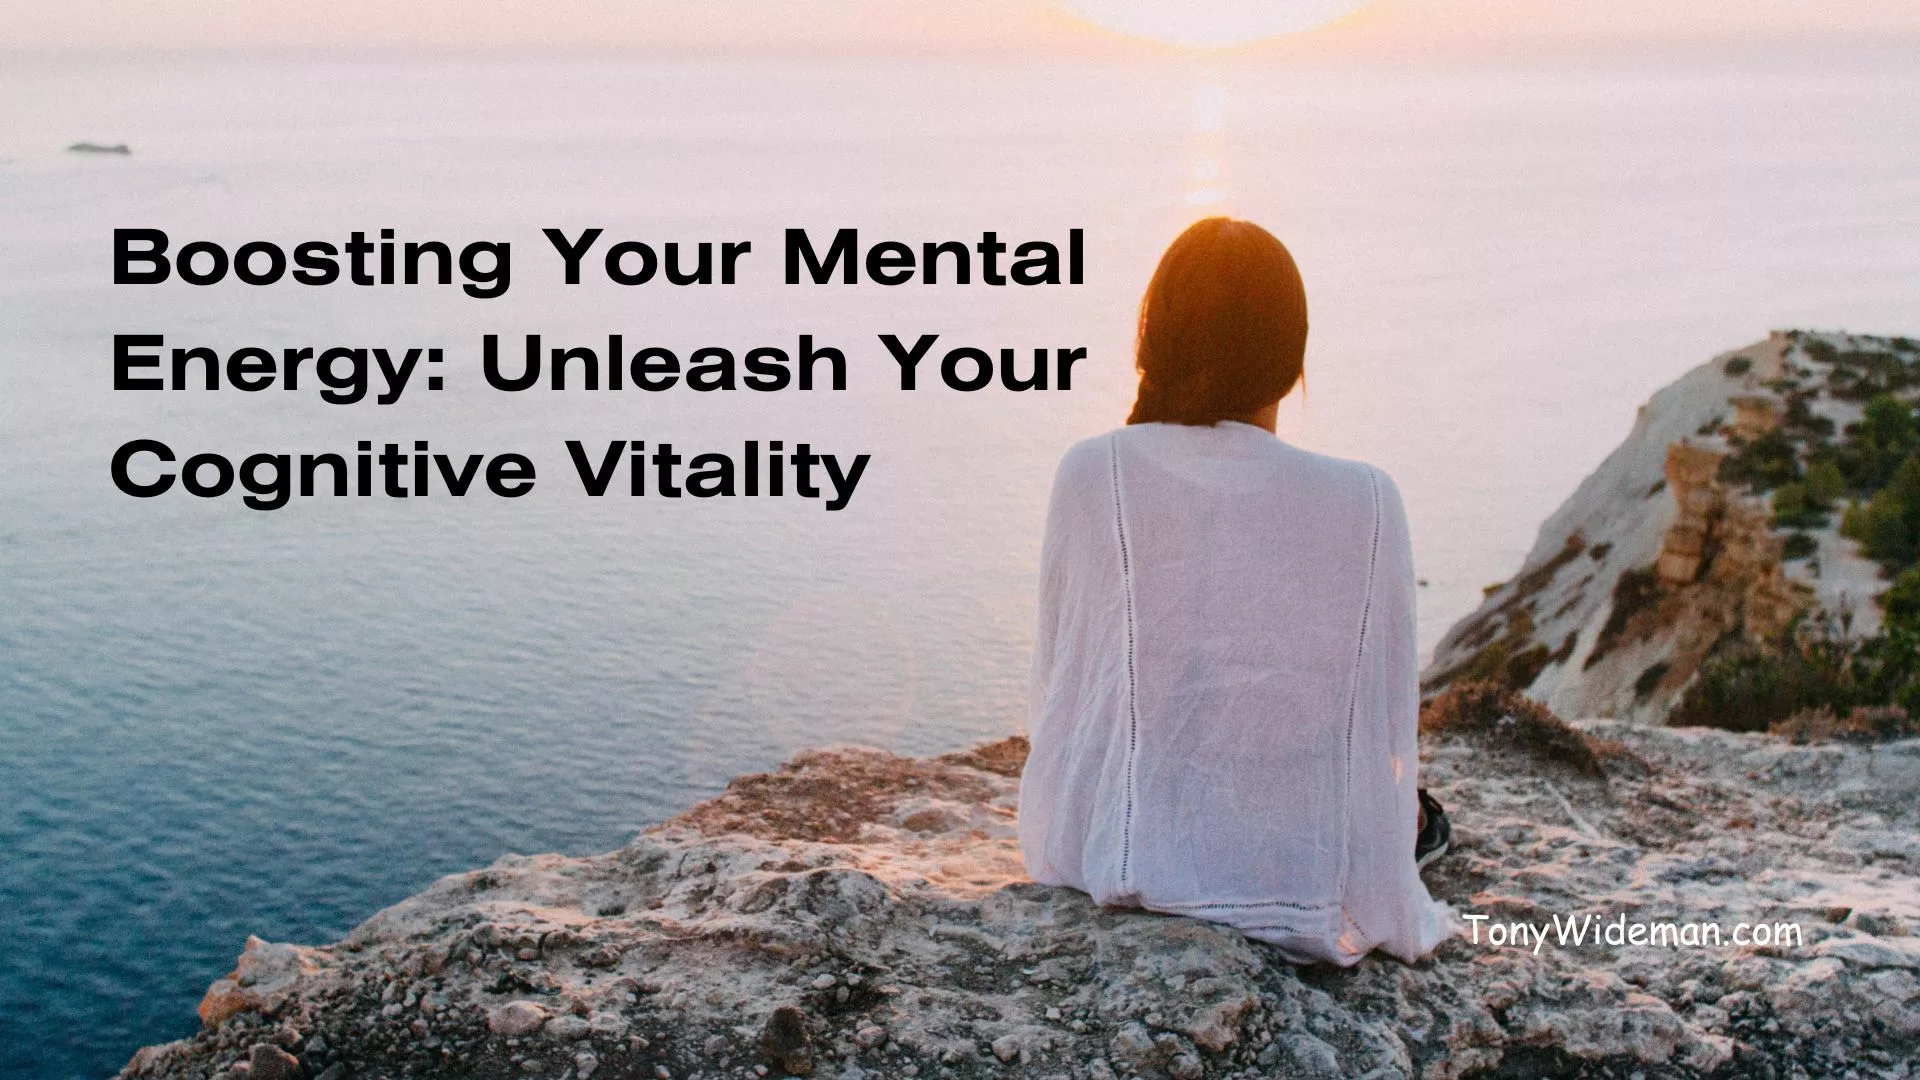 Boosting Your Mental Energy: Unleash Your Cognitive Vitality